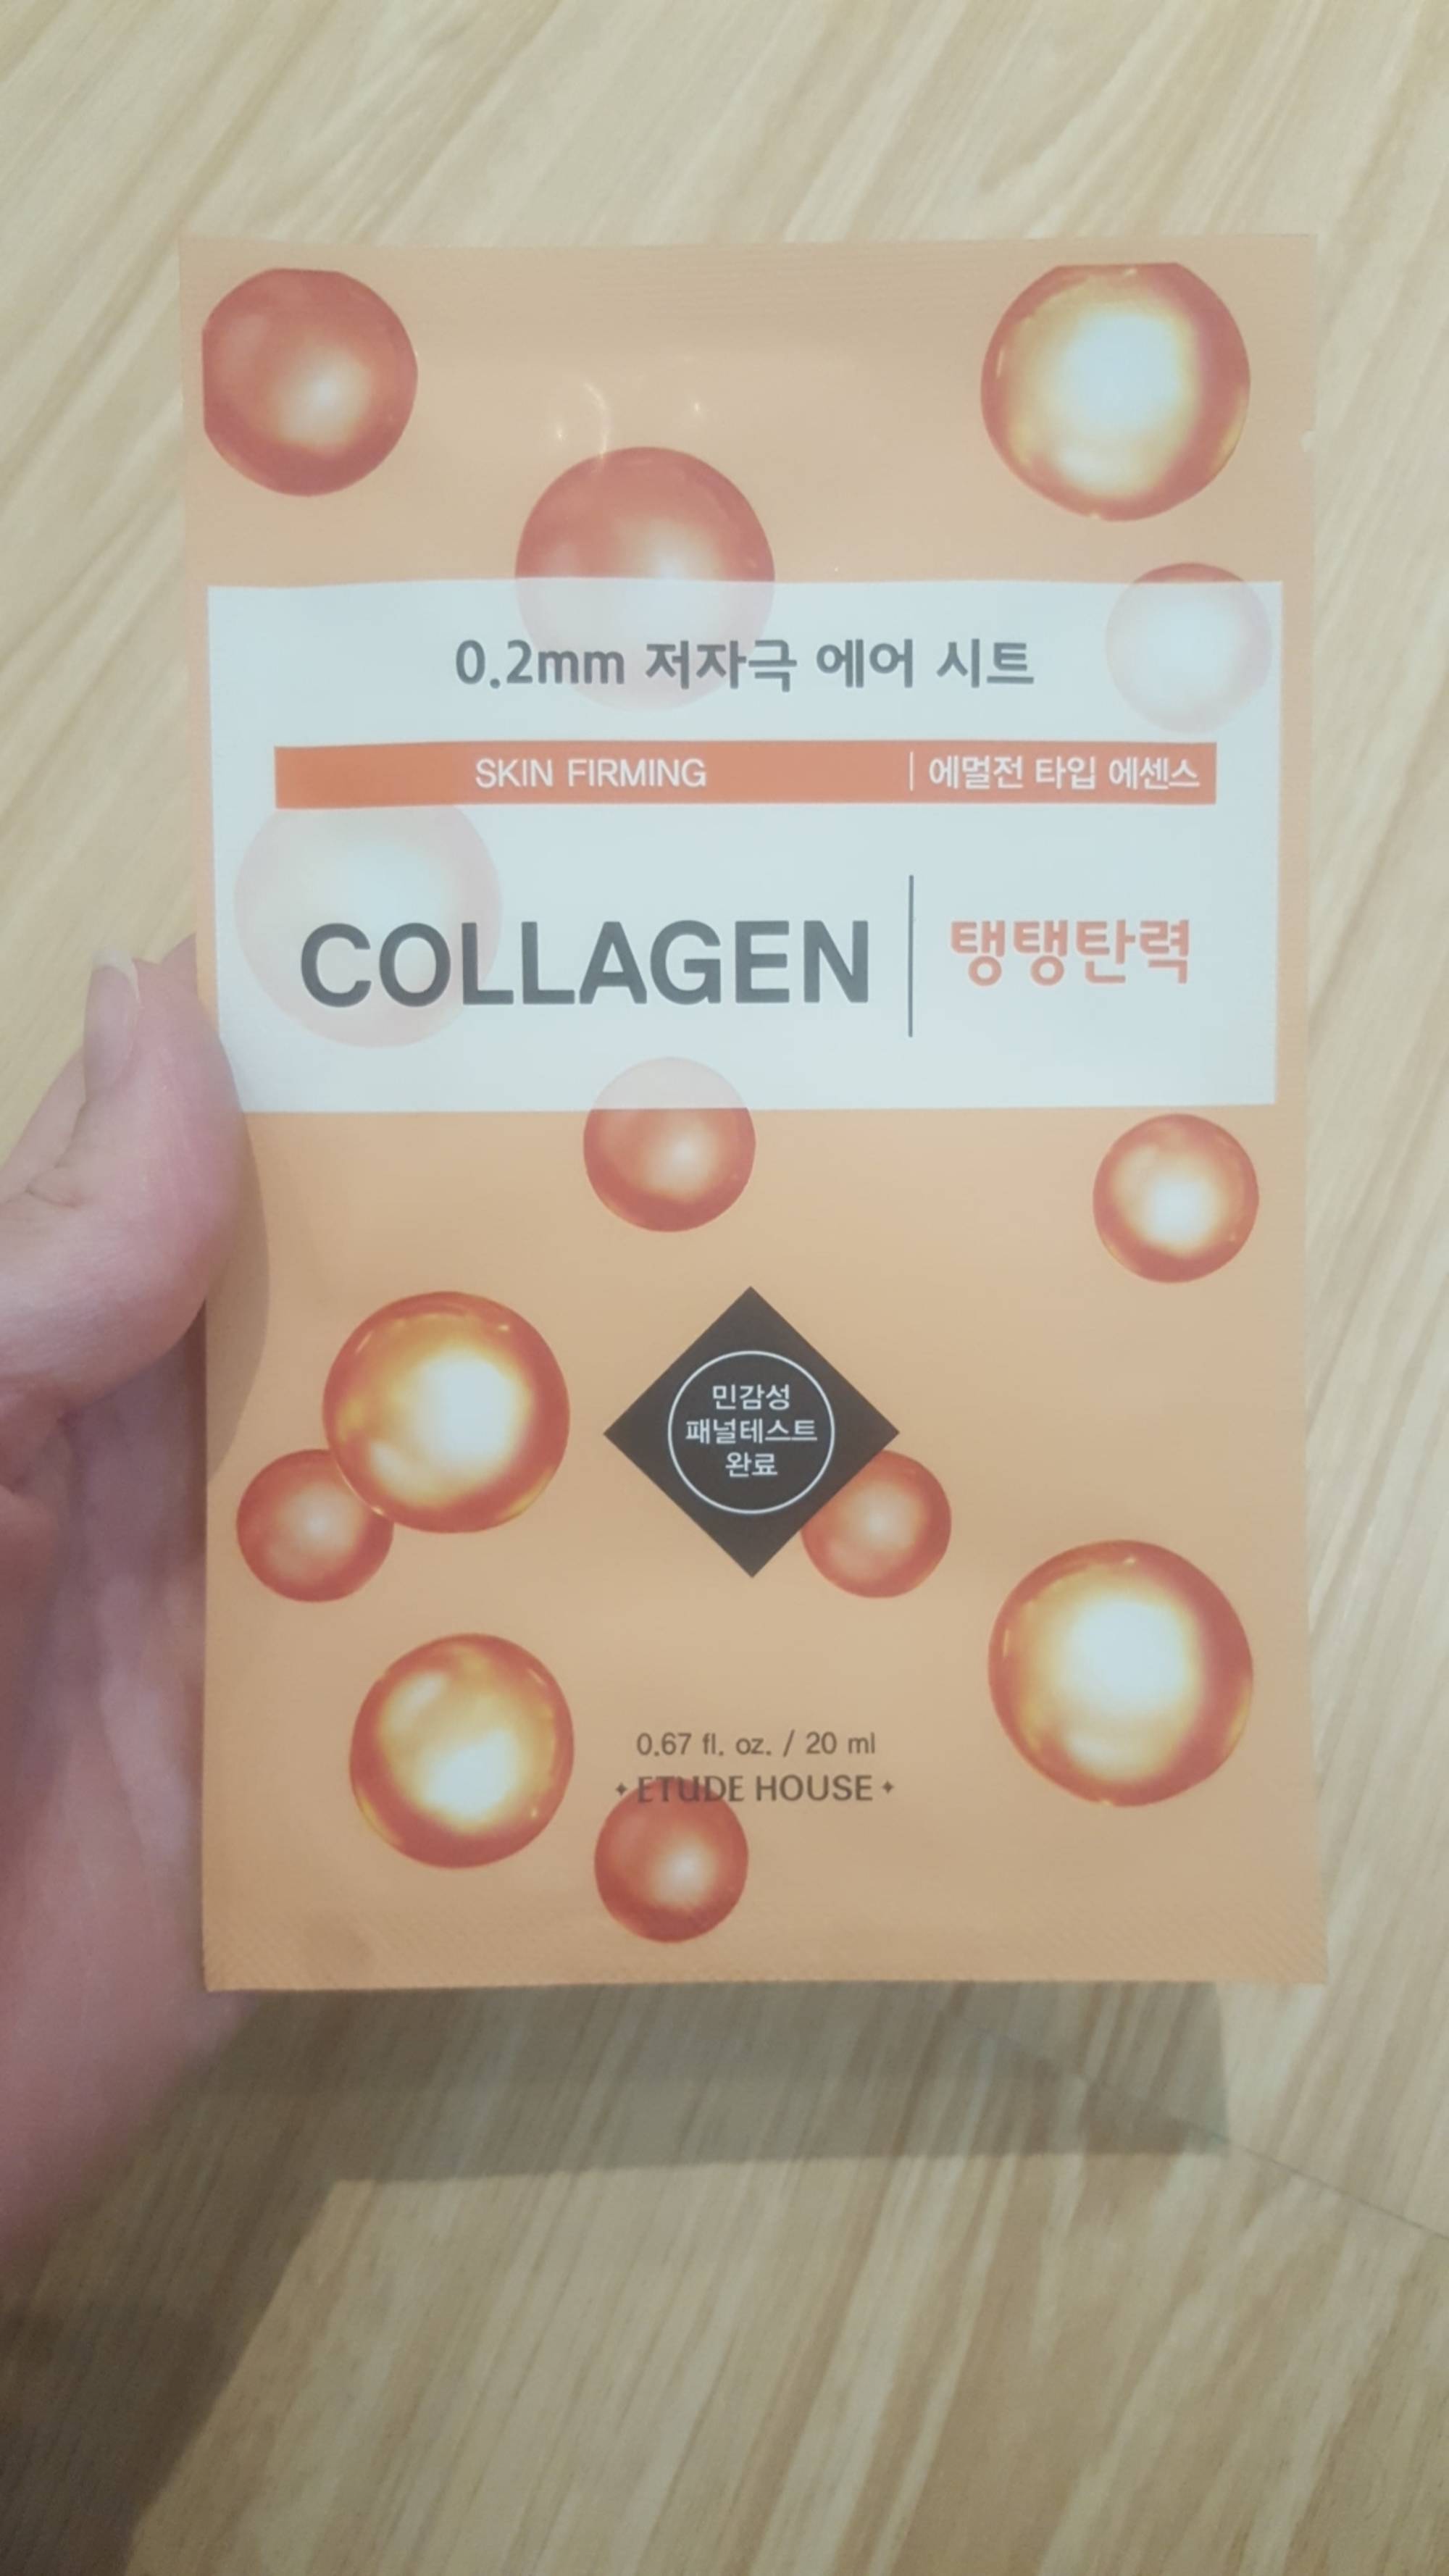 ETUDE HOUSE - Collagen - Therapy air mask skin firming